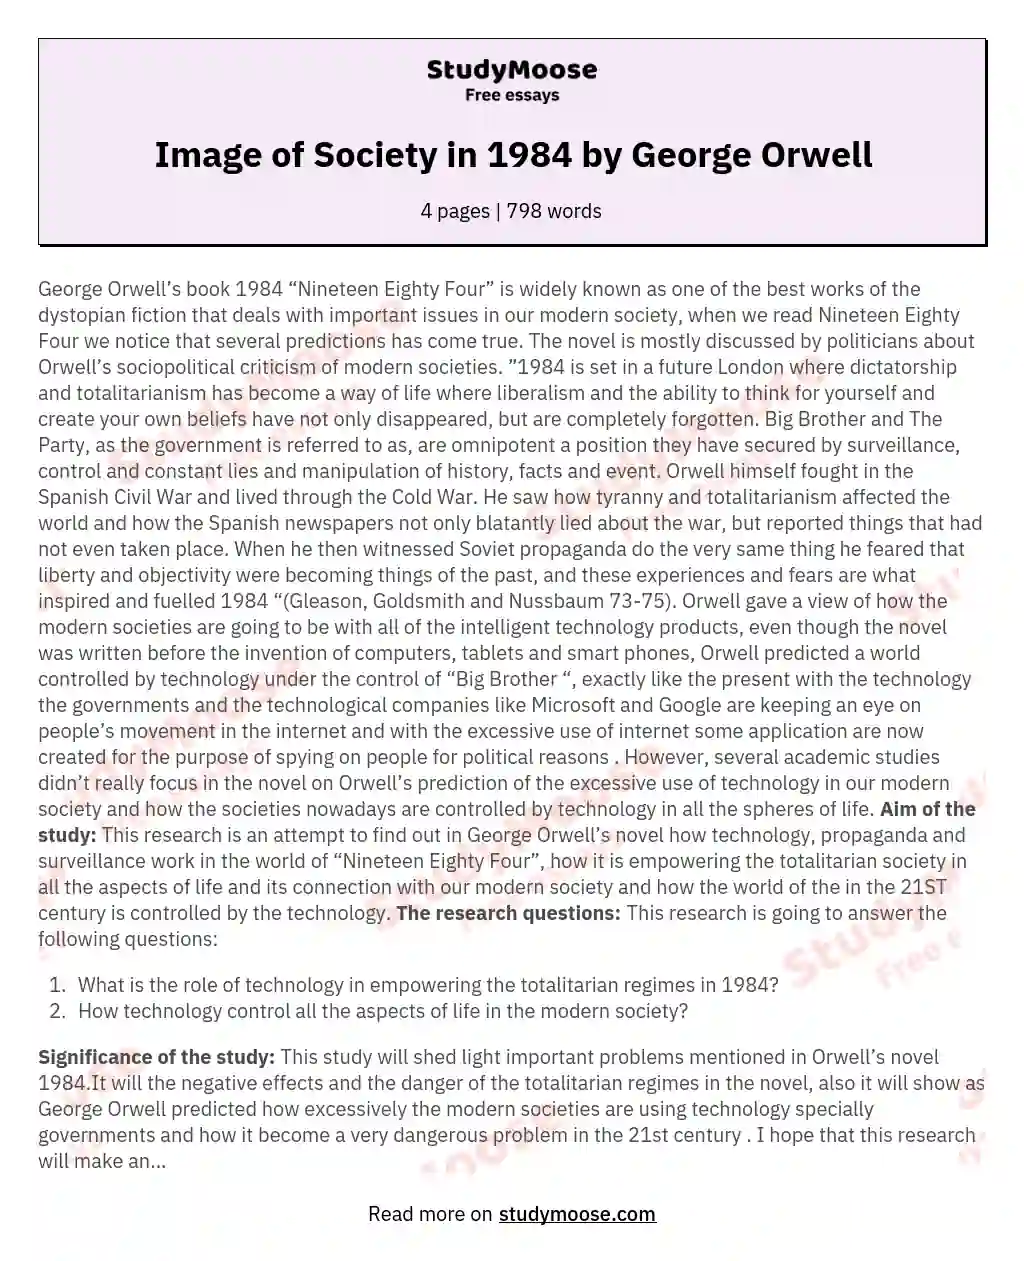 Image of Society in 1984 by George Orwell essay